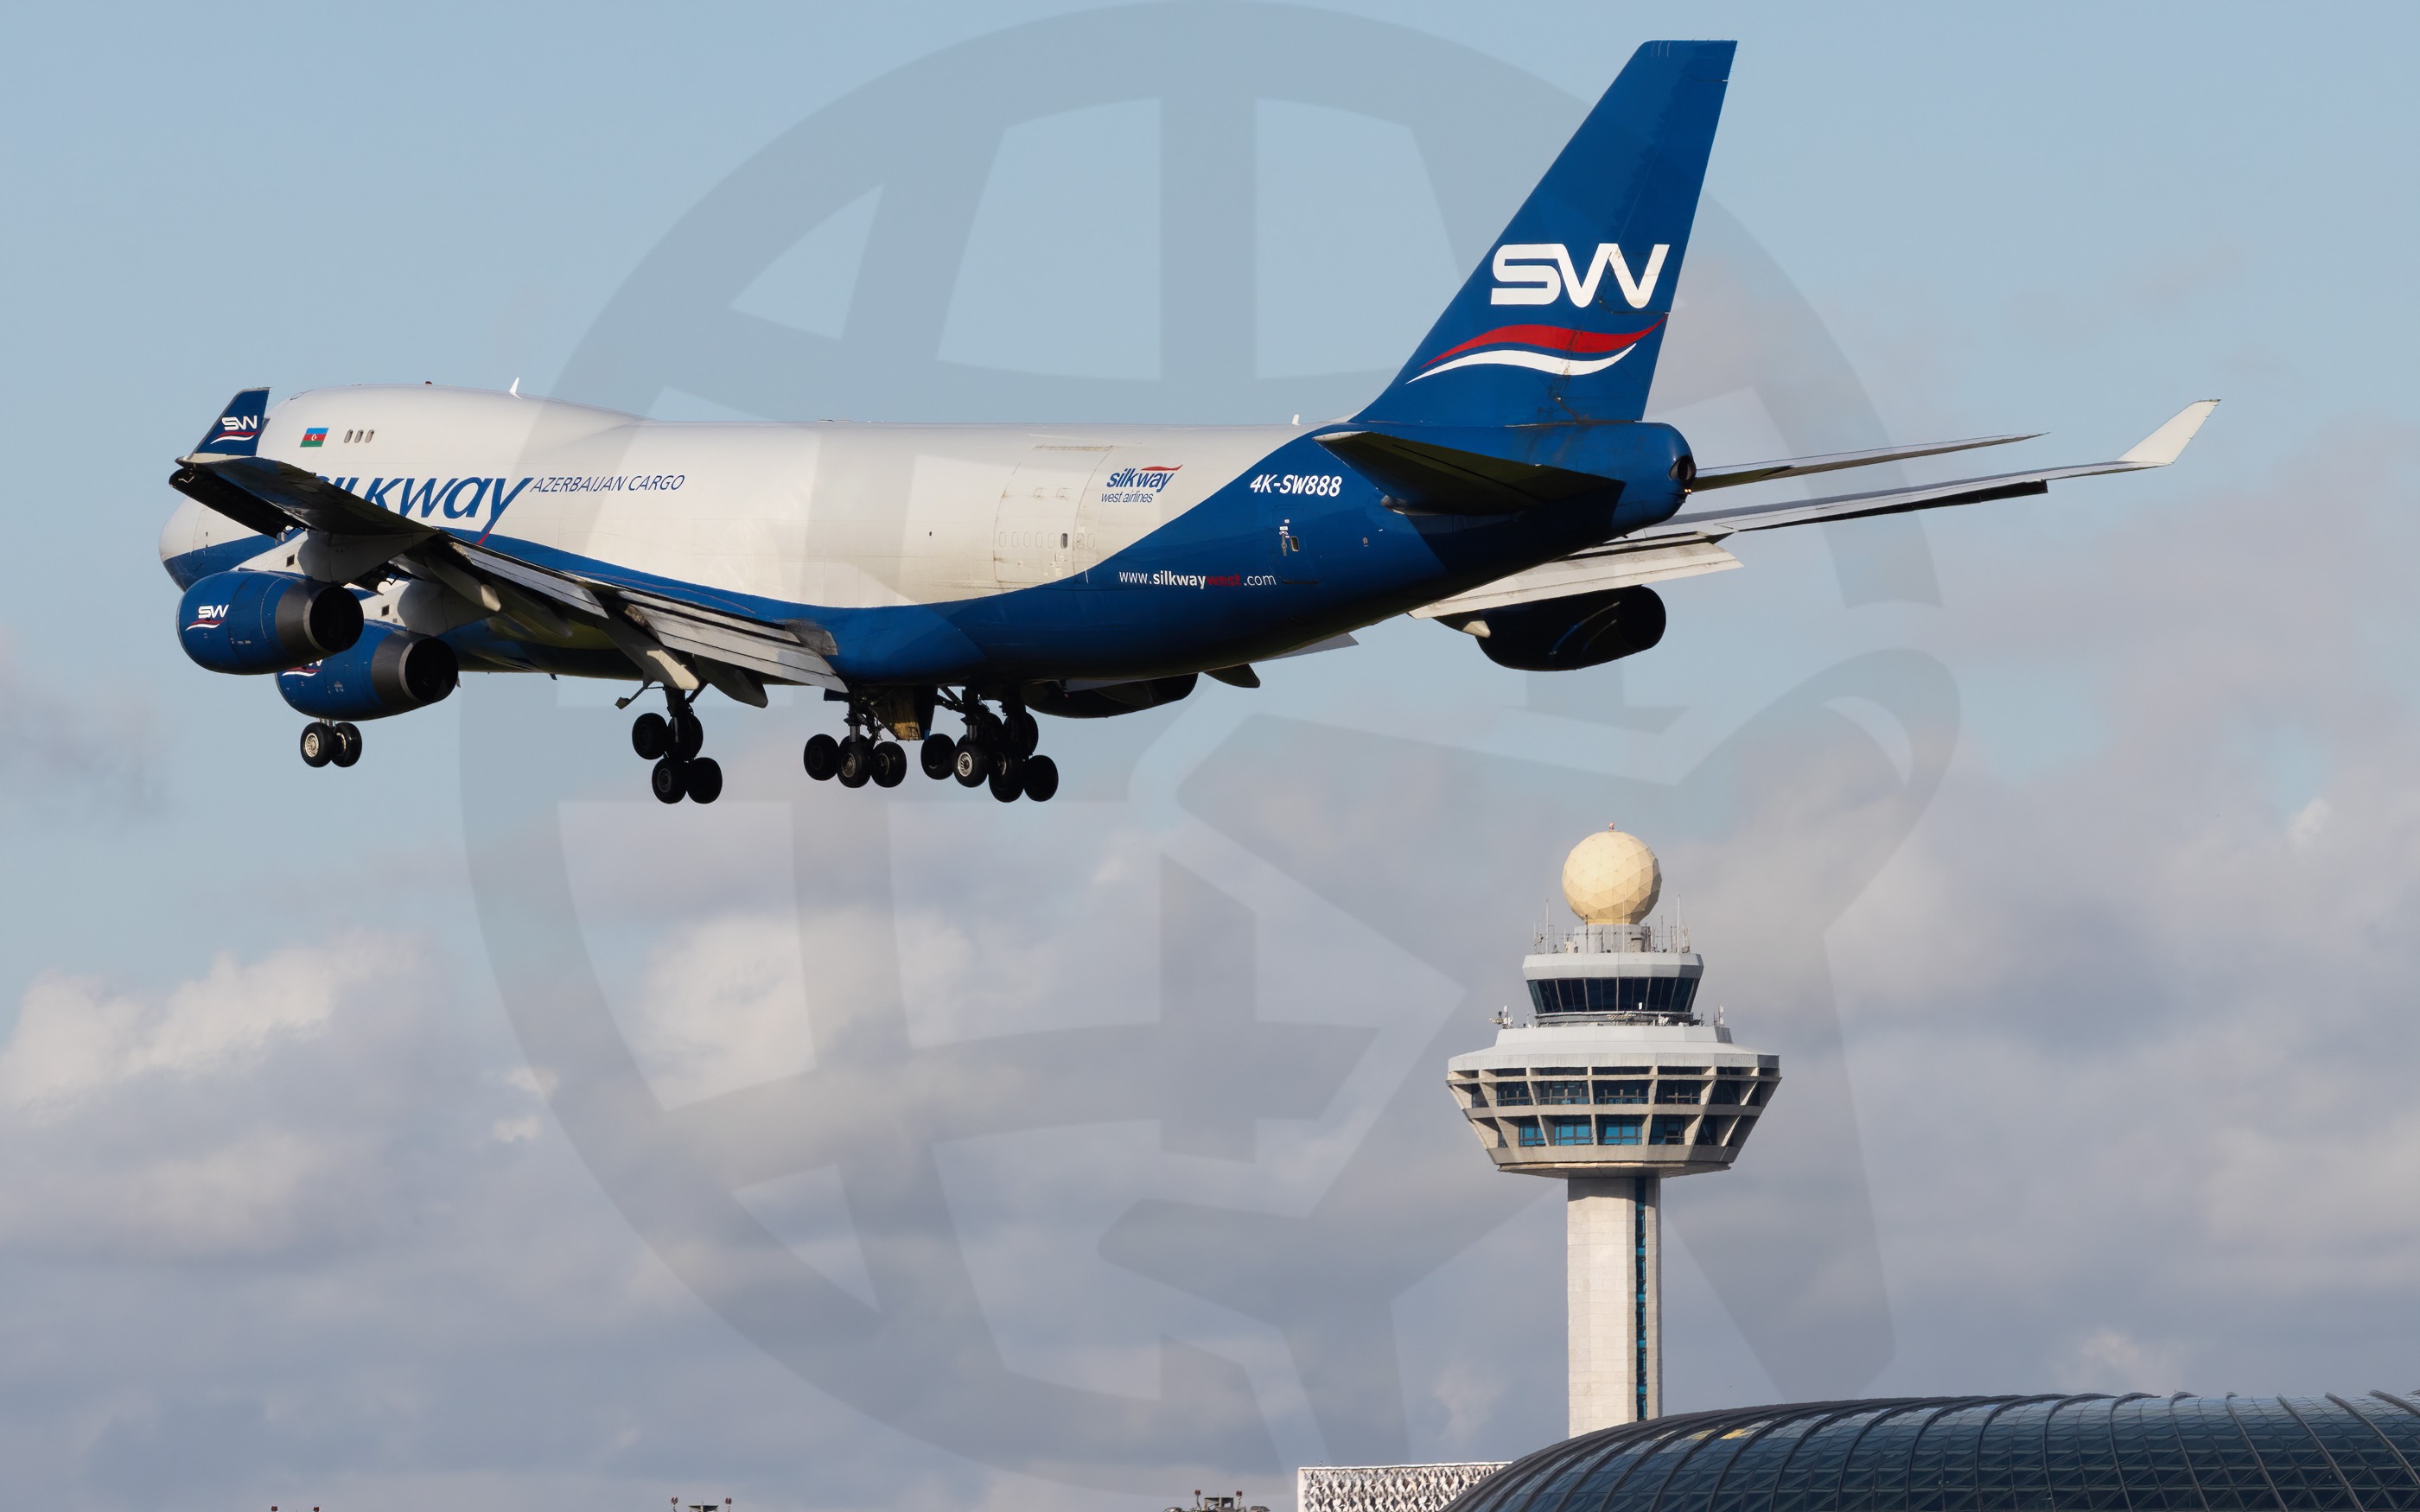 Photo of 4K-SW888 - Silkway West Airlines 747-400F by 